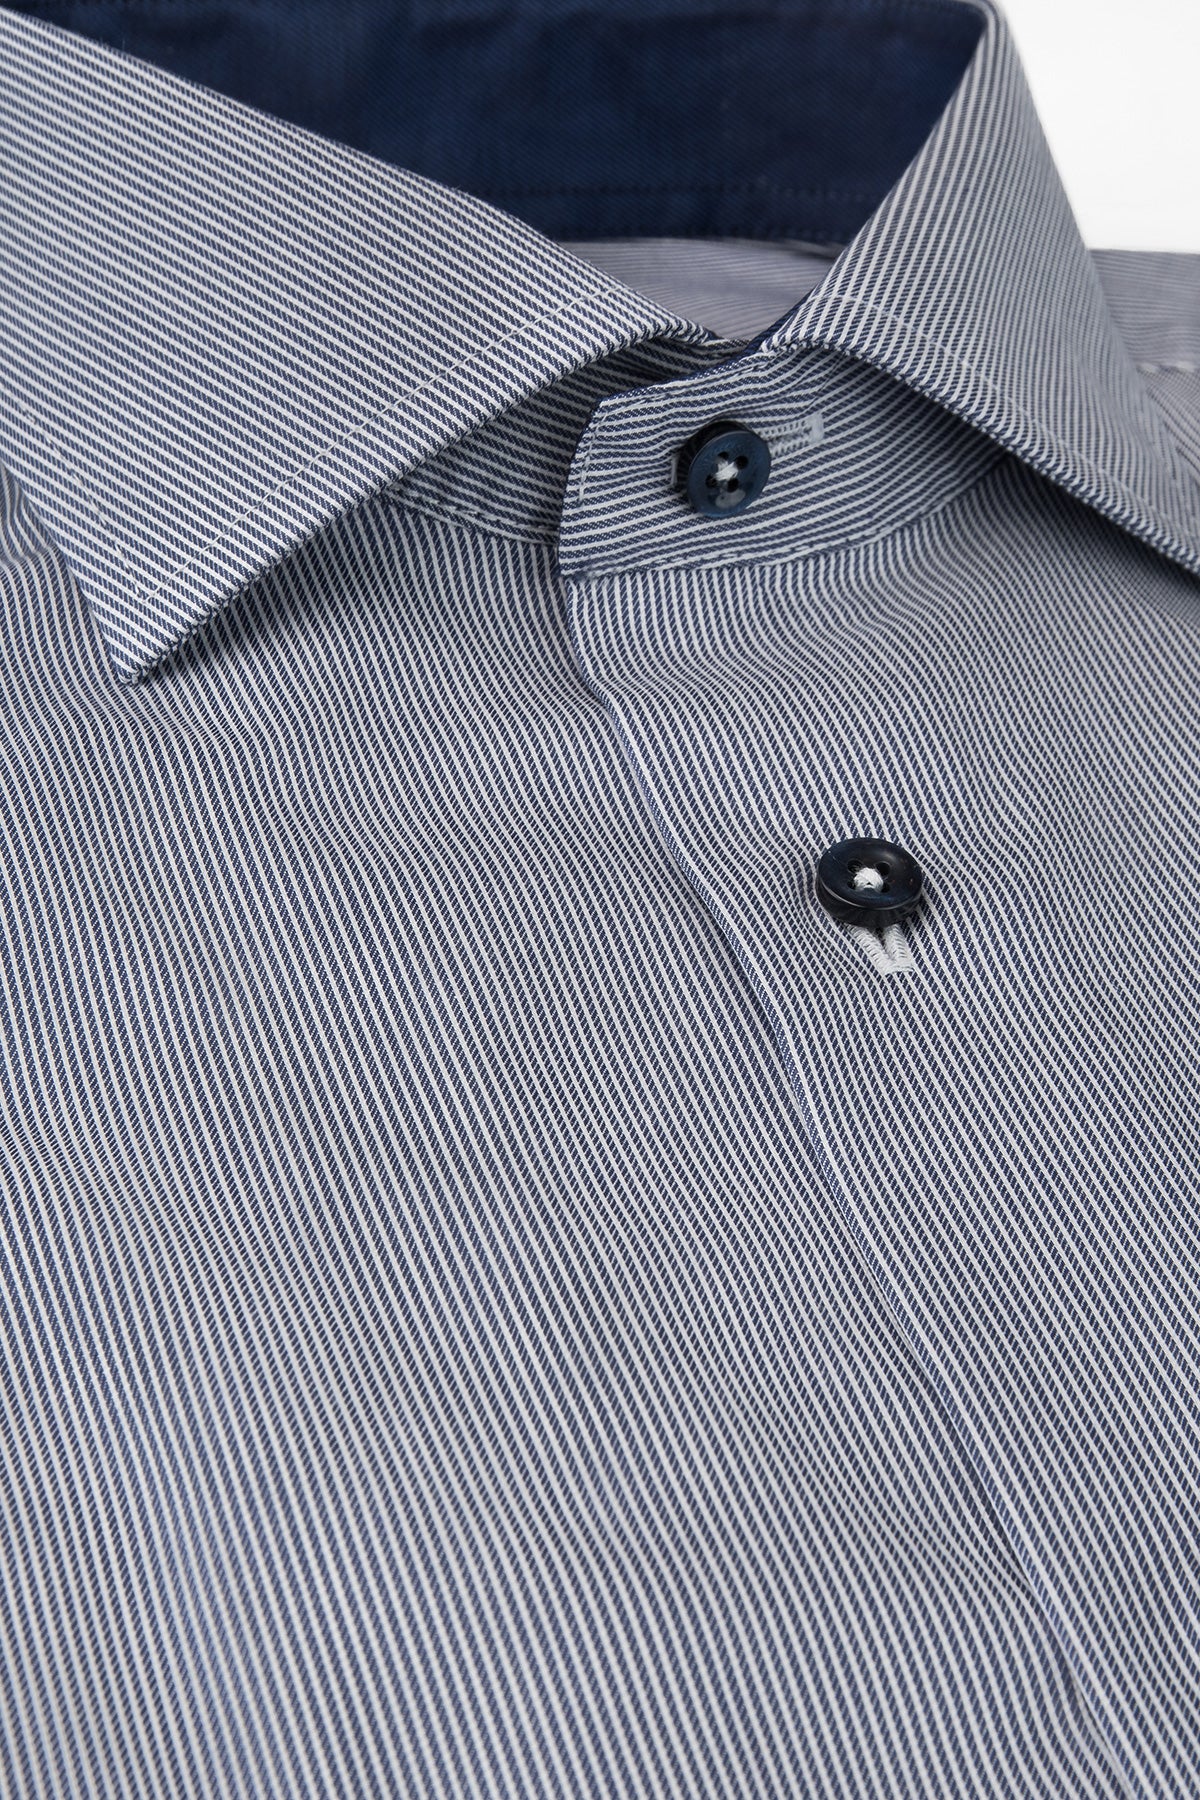 Blue striped regular fit shirt with contrast details